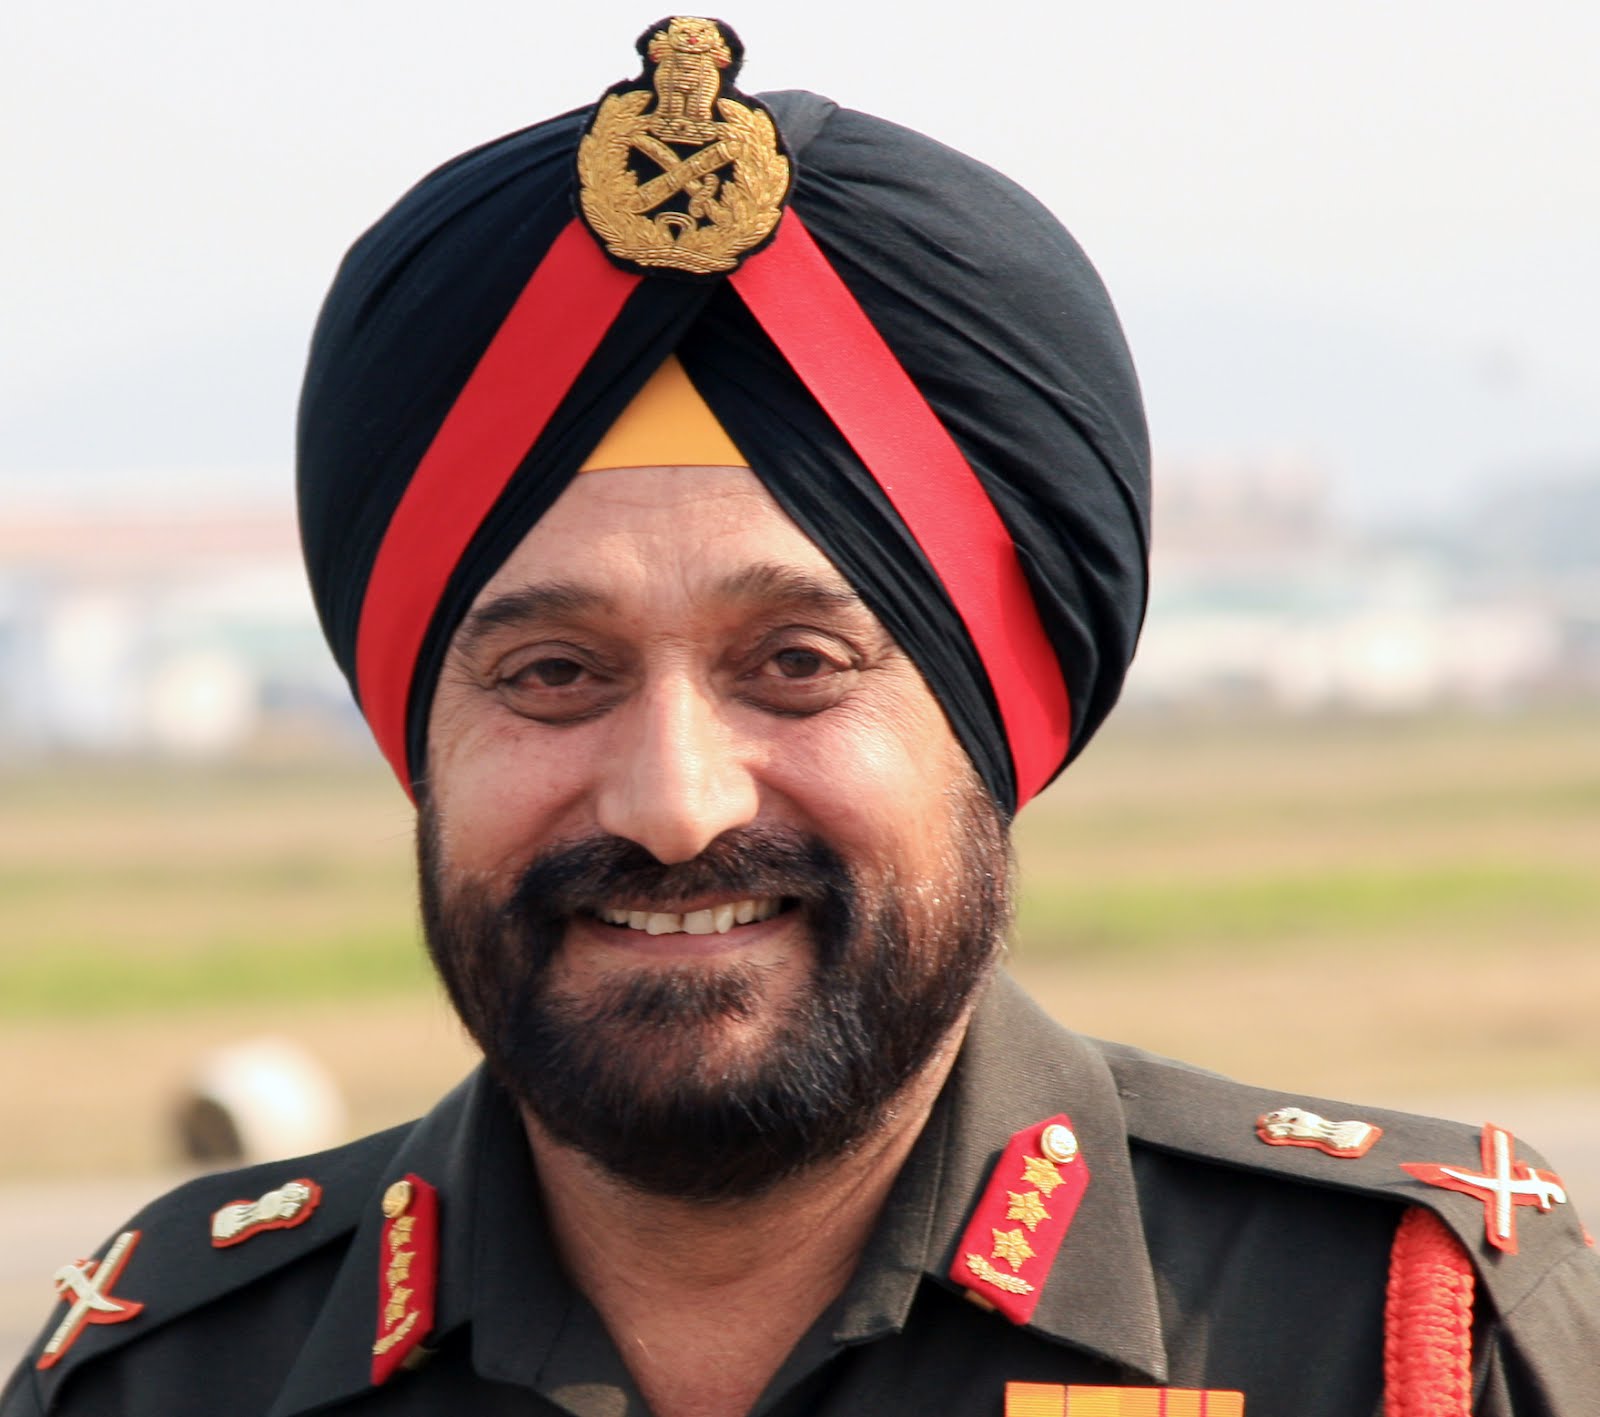 Indian Army Officer Uniform